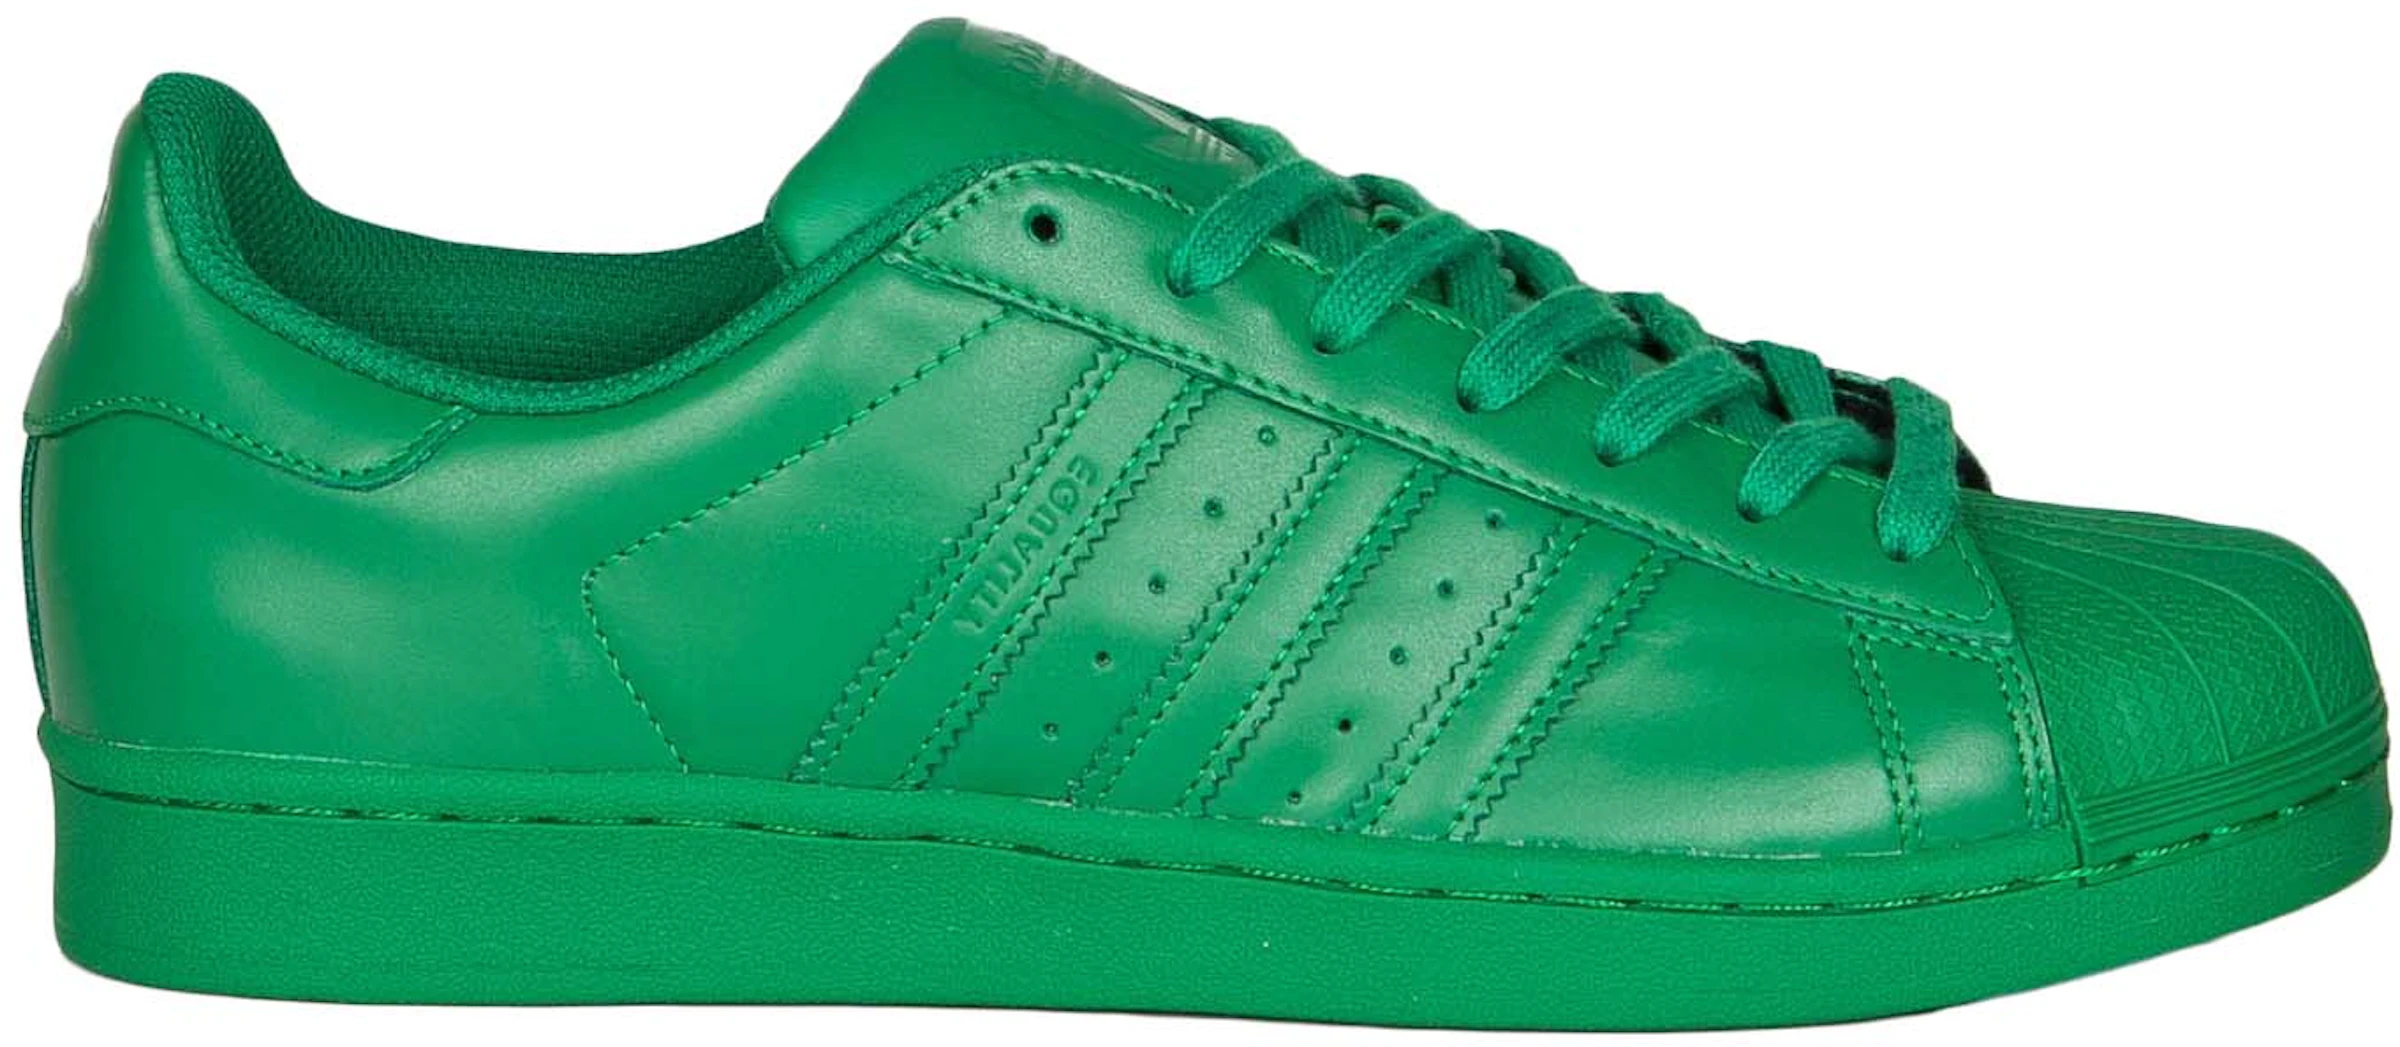 Arne cilinder domein adidas Superstar Pharell Supercolor Pack Green - S83389 - US